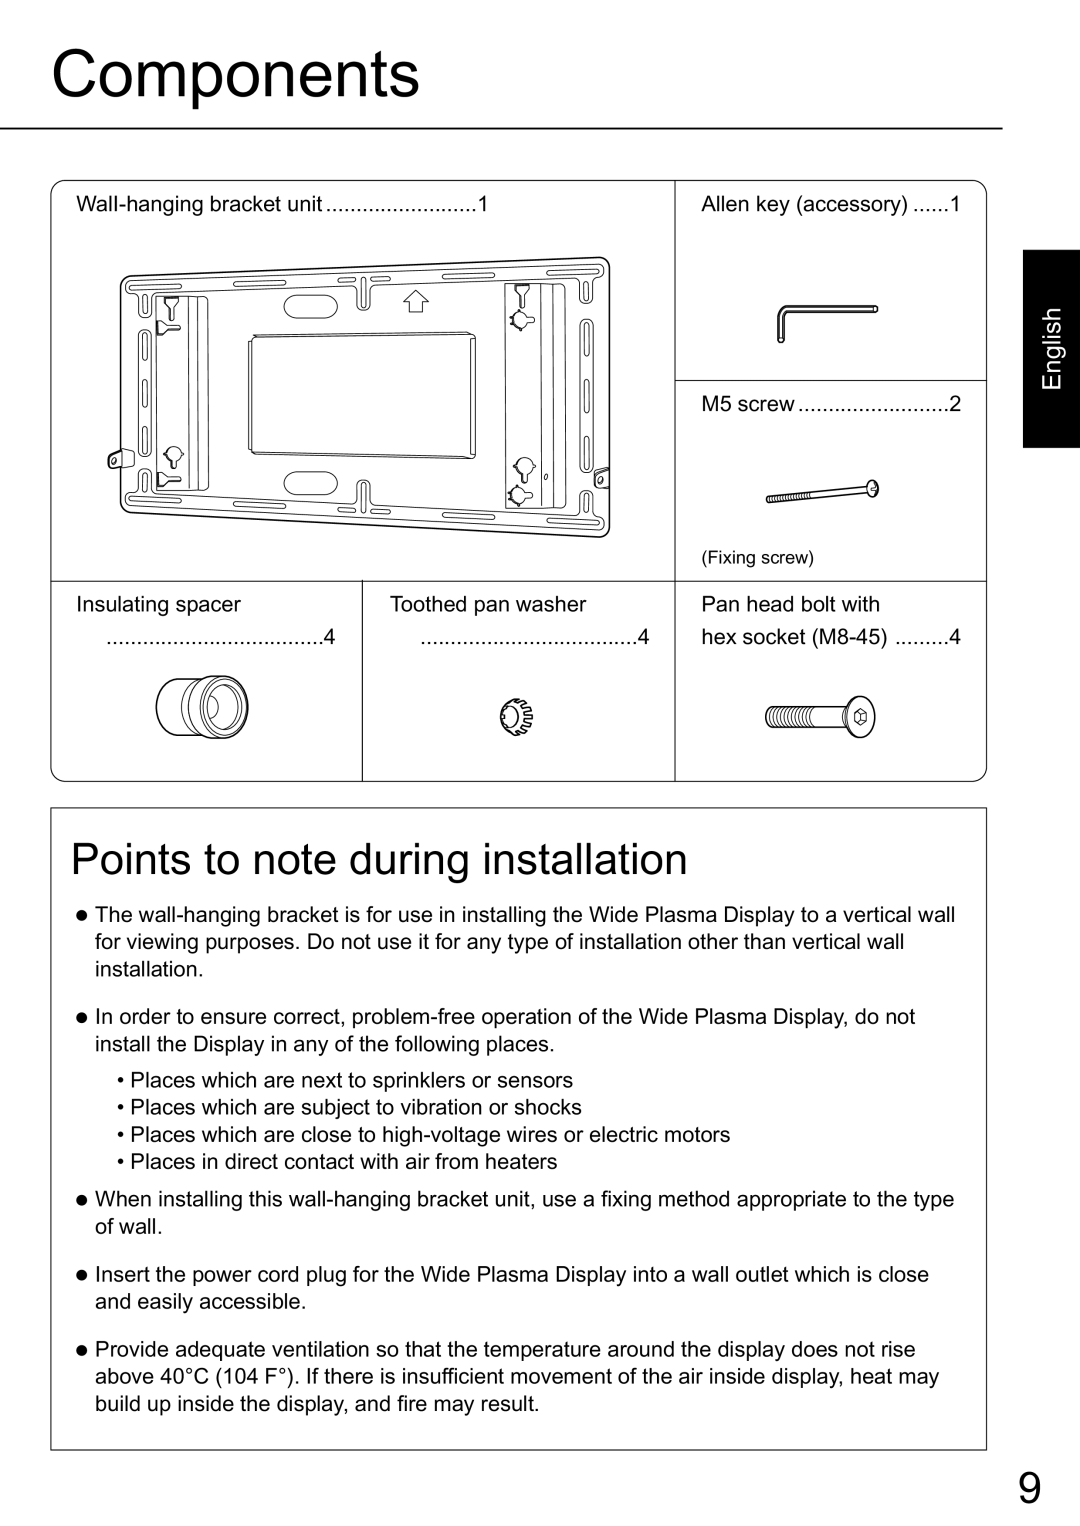 JVC TS-C50P2G, TS-C50P6G manual Components, Points to note during installation, English, WalI-hangingbracket unit 